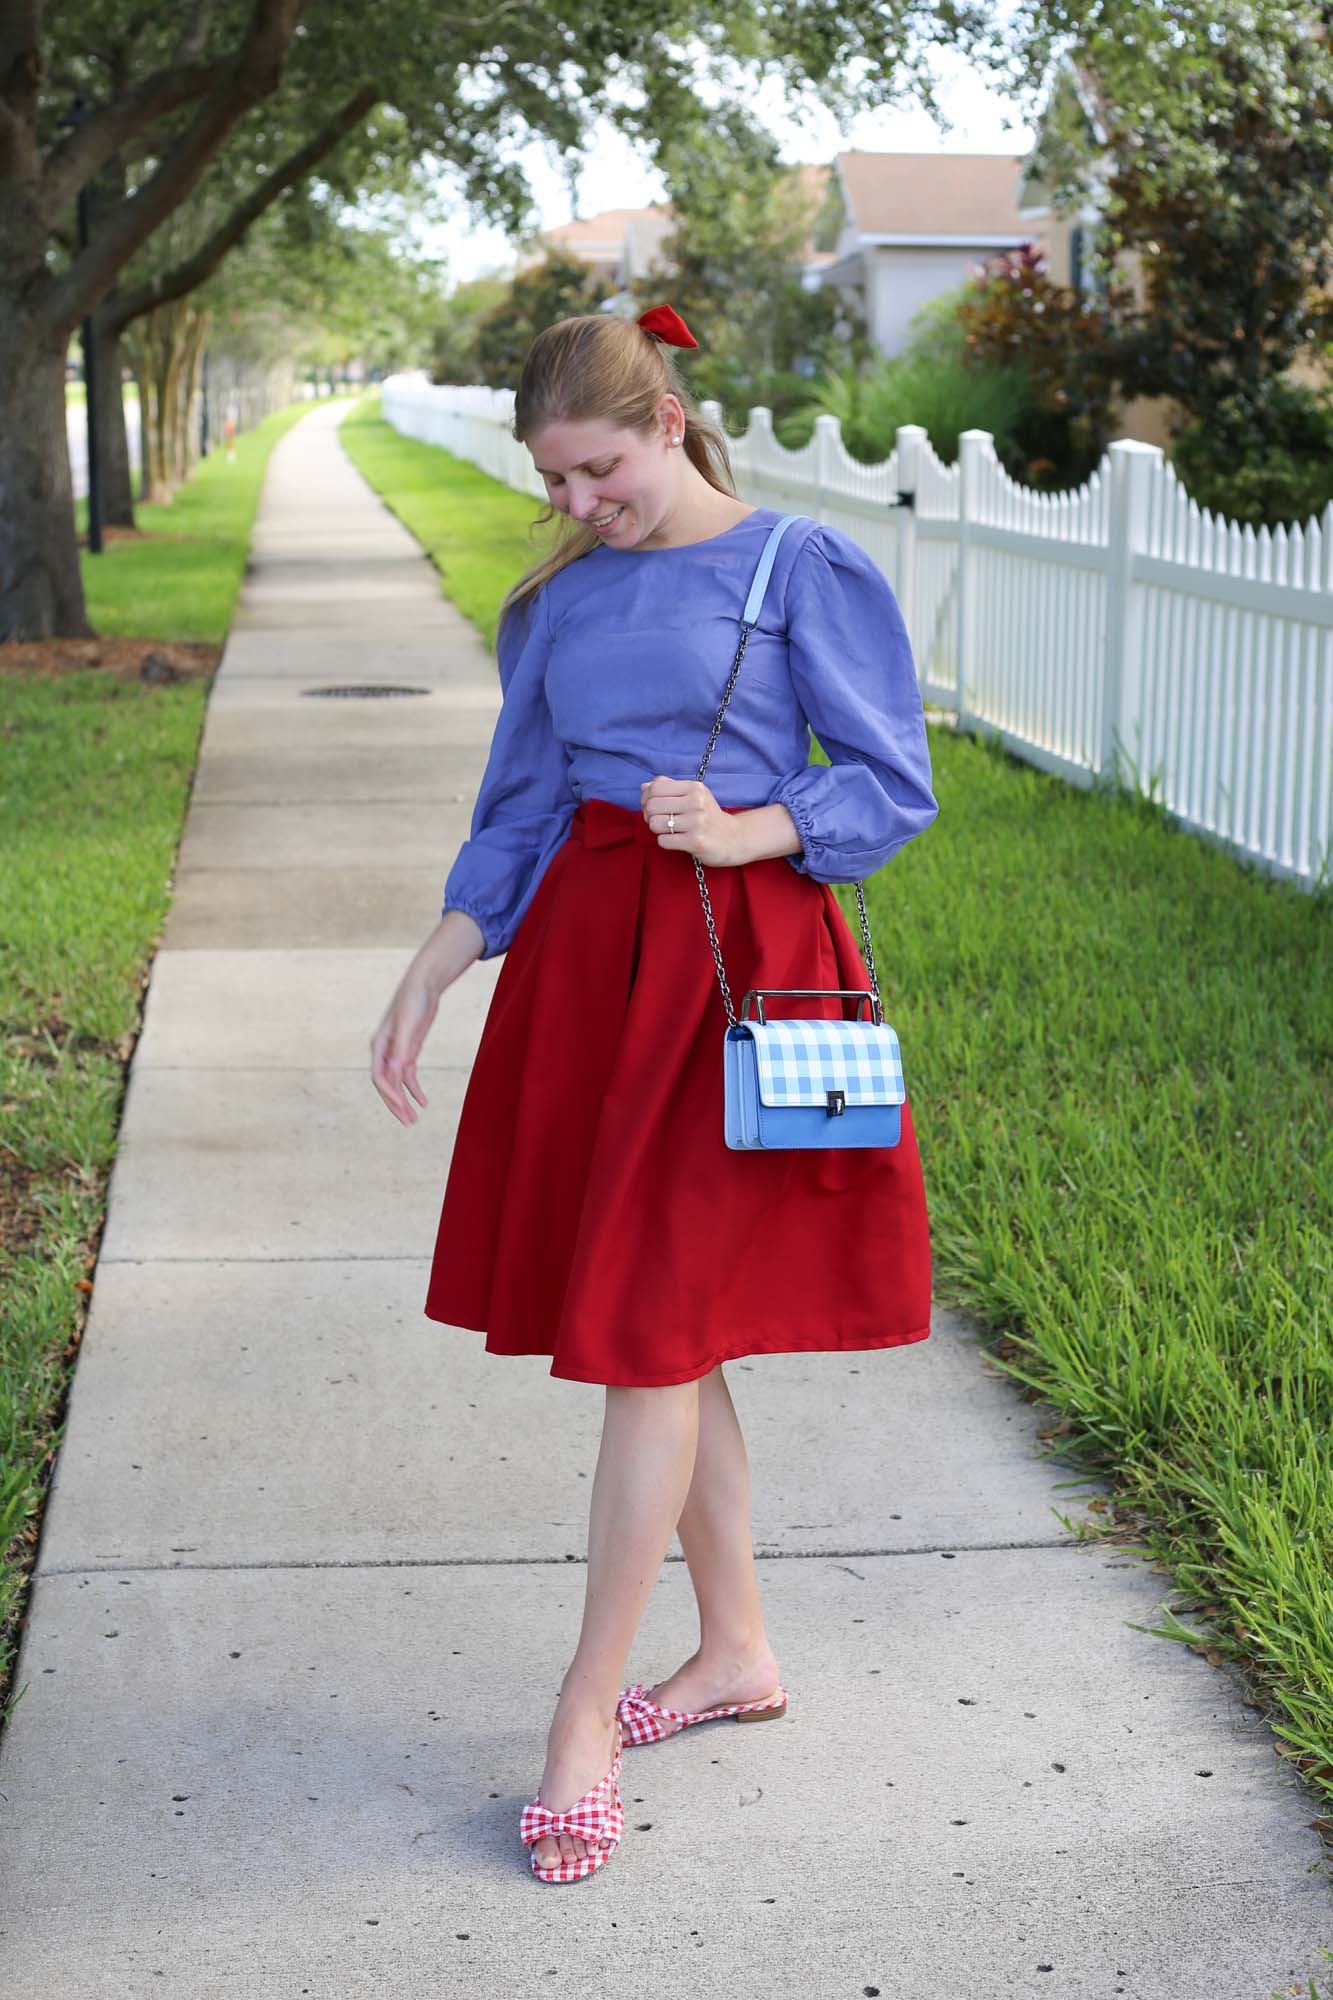 Patriotic Outfit Ideas from My Closet - Central Florida Chic